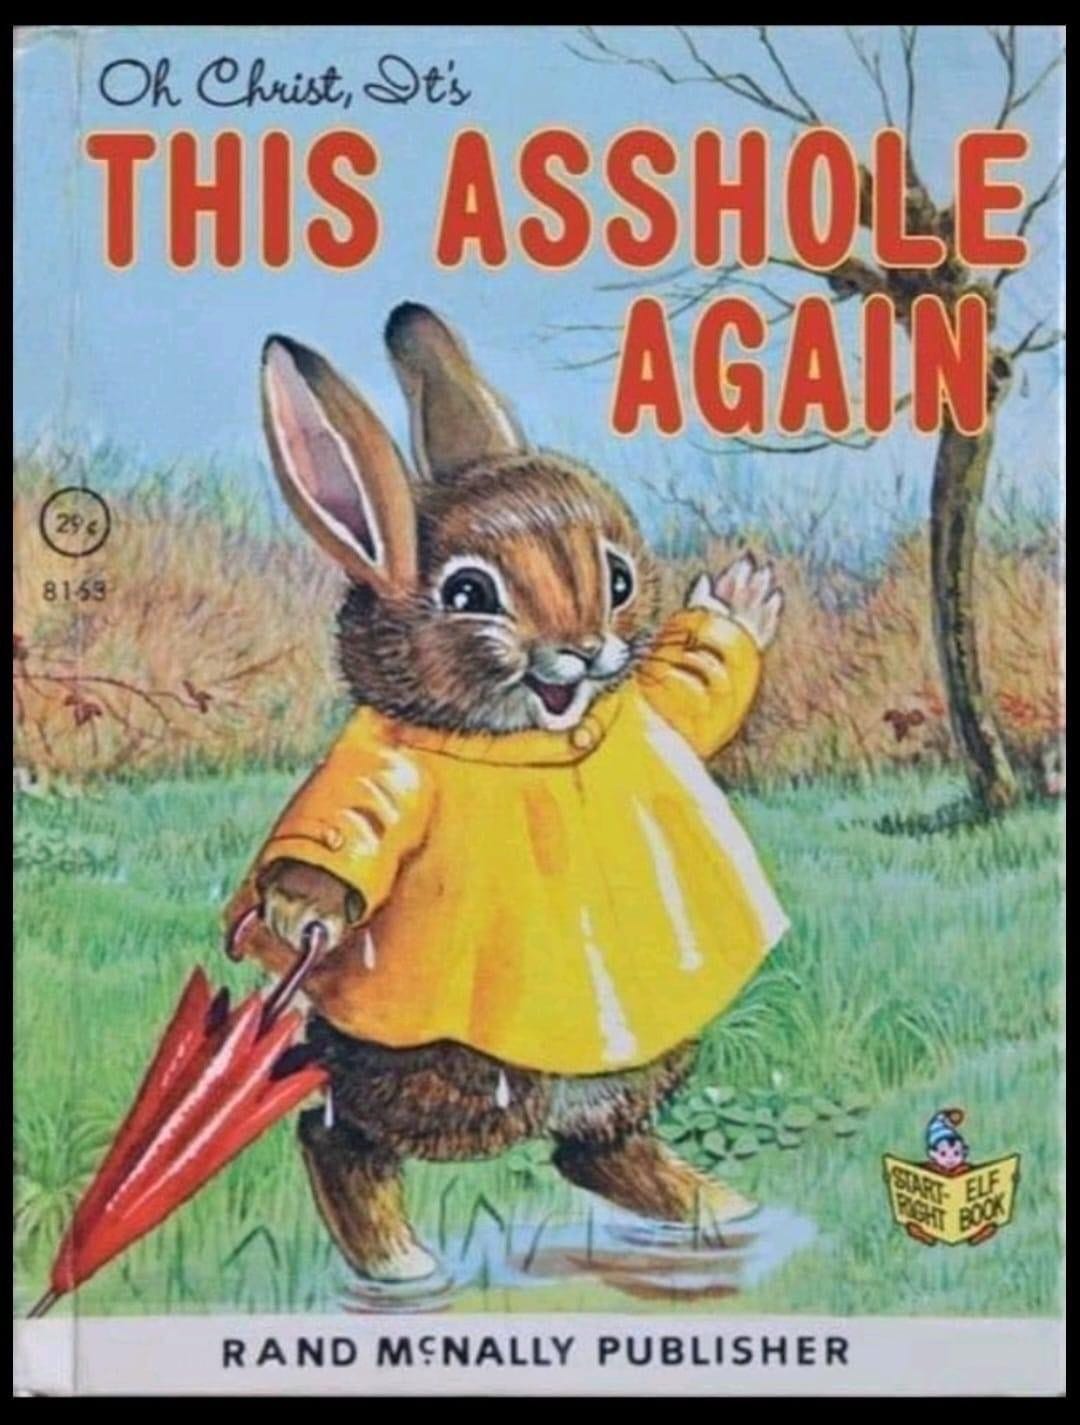 Cover of vintage children's book with cute bunny wearing raincoat, title is "Oh Christ, It's This Asshole Again"